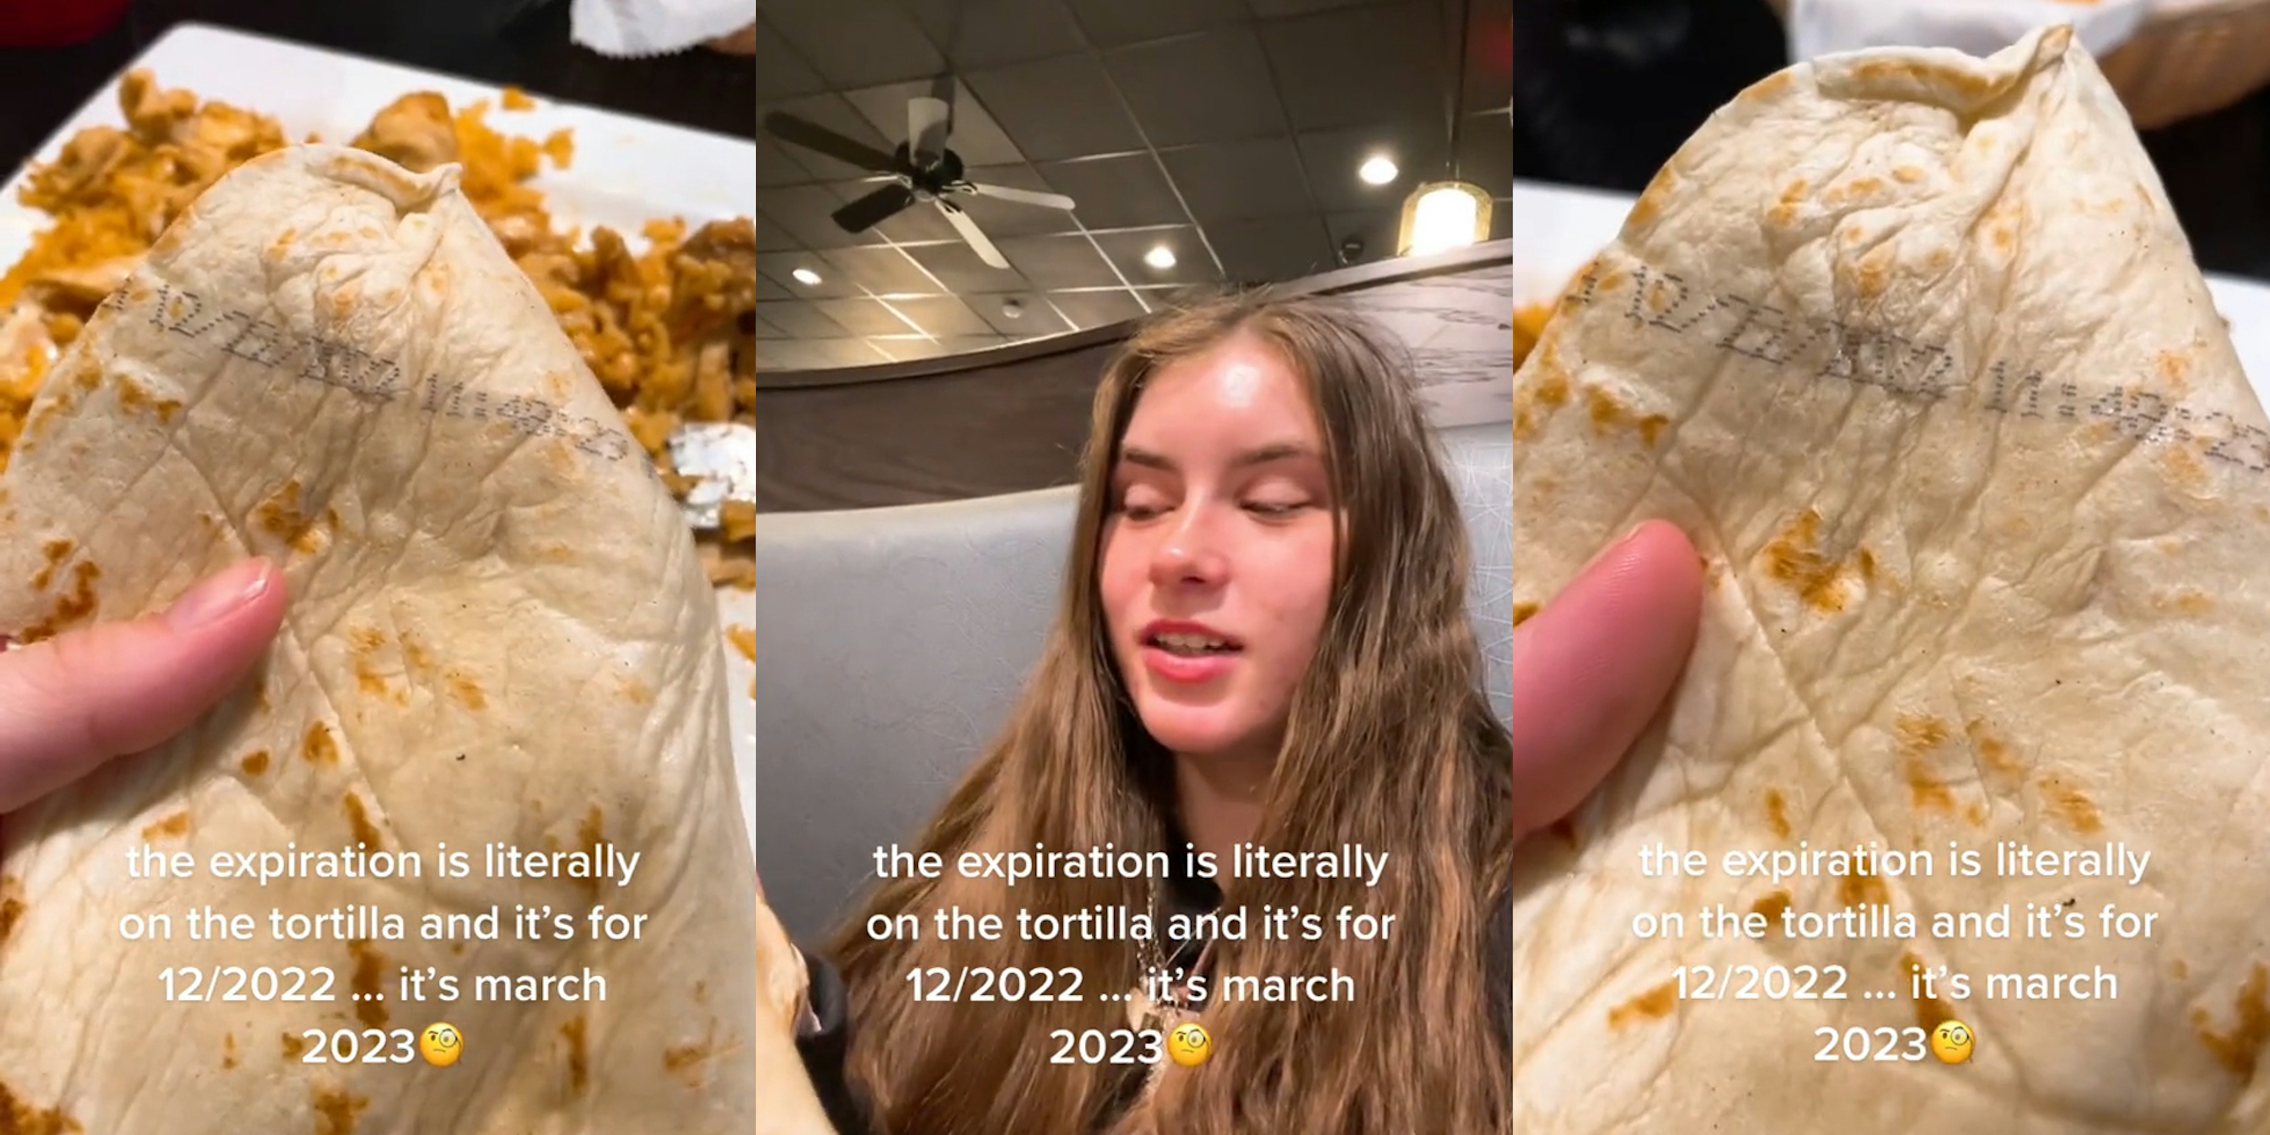 hand holding up tortilla at restaurant with expiration date on it with caption 'the expiration is literally on the tortilla and it's for 12/2022... it's march 2023' (l) customer looking at tortilla at restaurant with caption 'the expiration is literally on the tortilla and it's for 12/2022... it's march 2023' (c) hand holding up tortilla at restaurant with expiration date on it with caption 'the expiration is literally on the tortilla and it's for 12/2022... it's march 2023' (r)